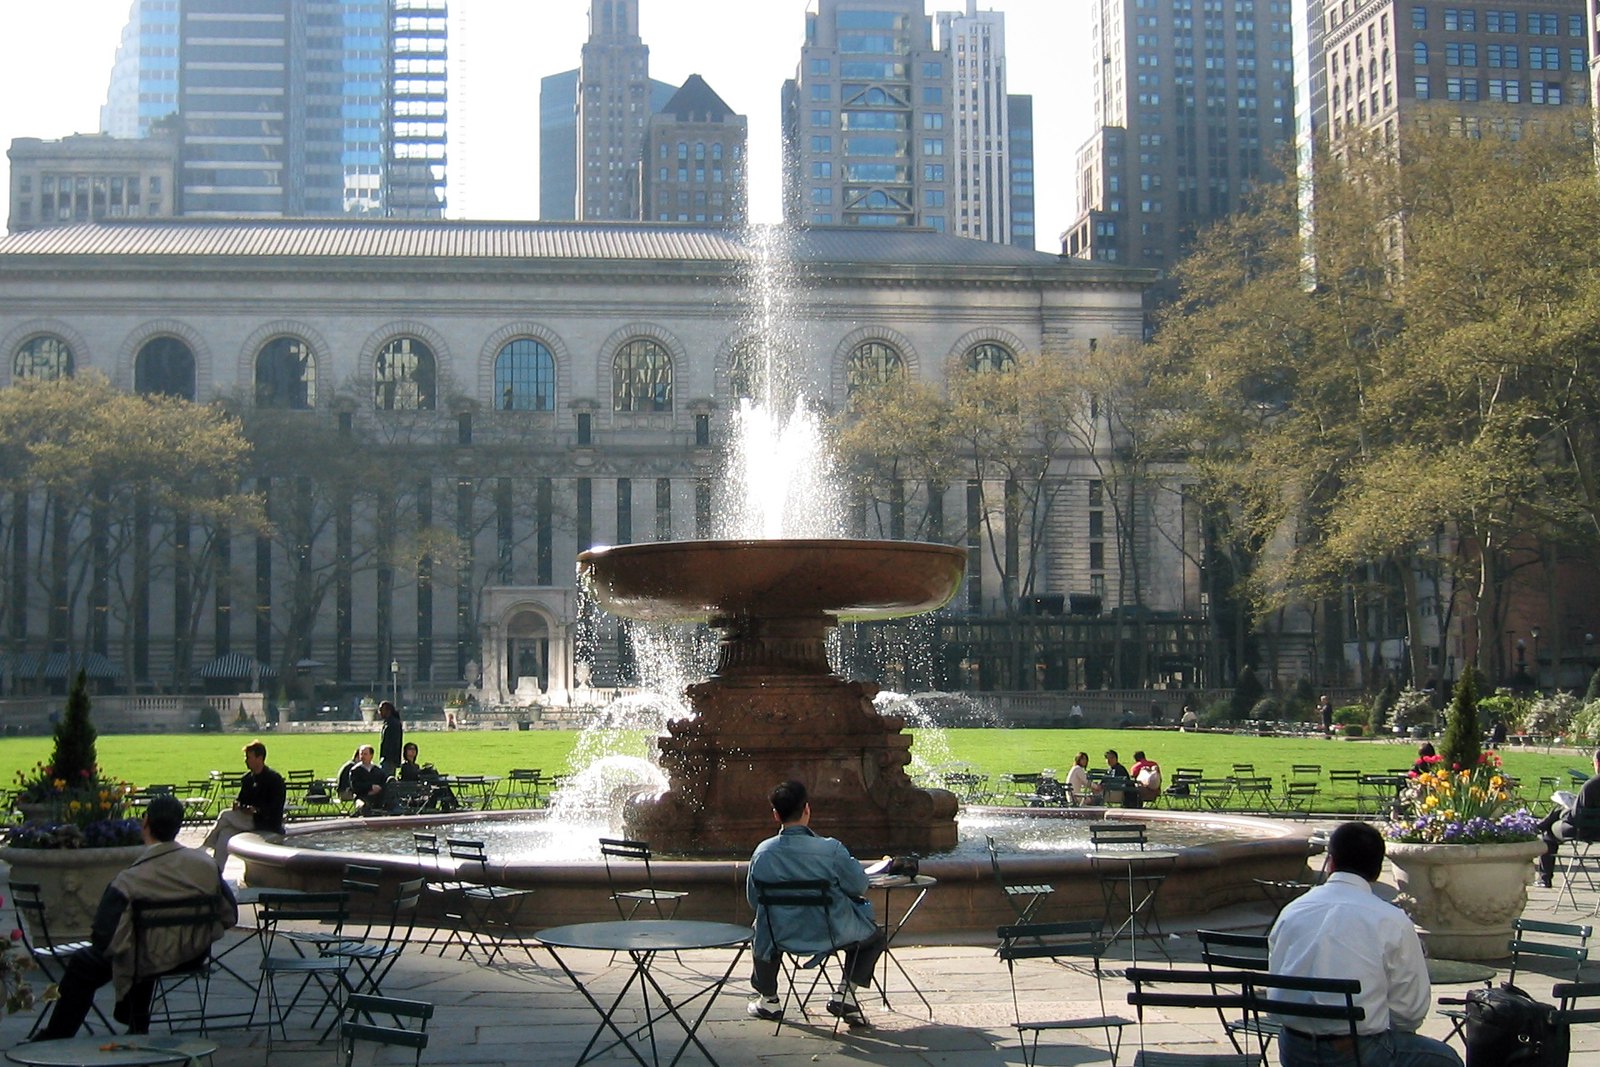 NYC - Midtown: Bryant Park and New York Public Library